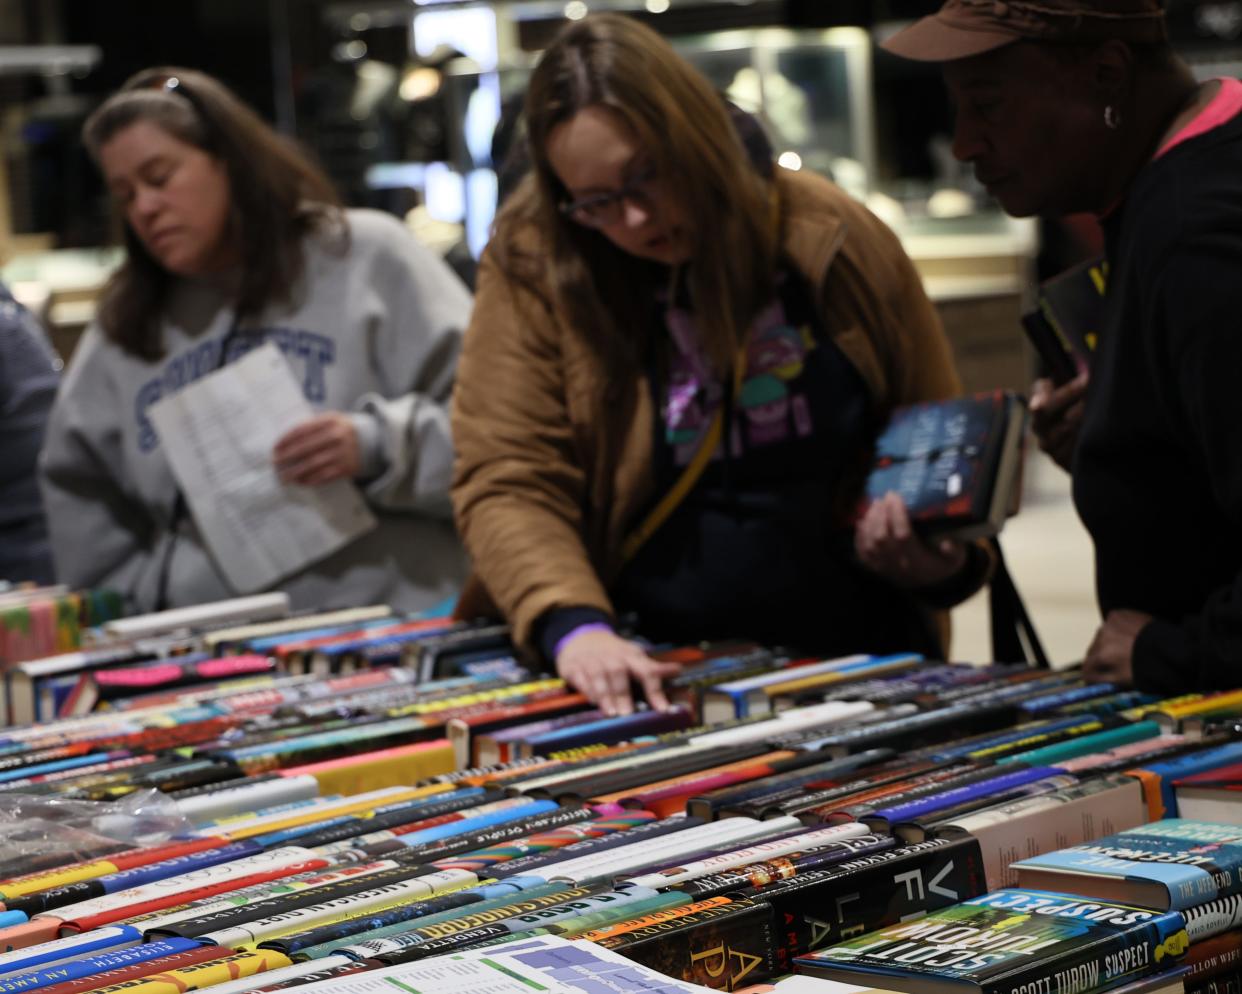 Bookstock will offer nearly 400,000 gently used books, DVDs, CDs and more April 7-14 at Laurel Park Place in Livonia.